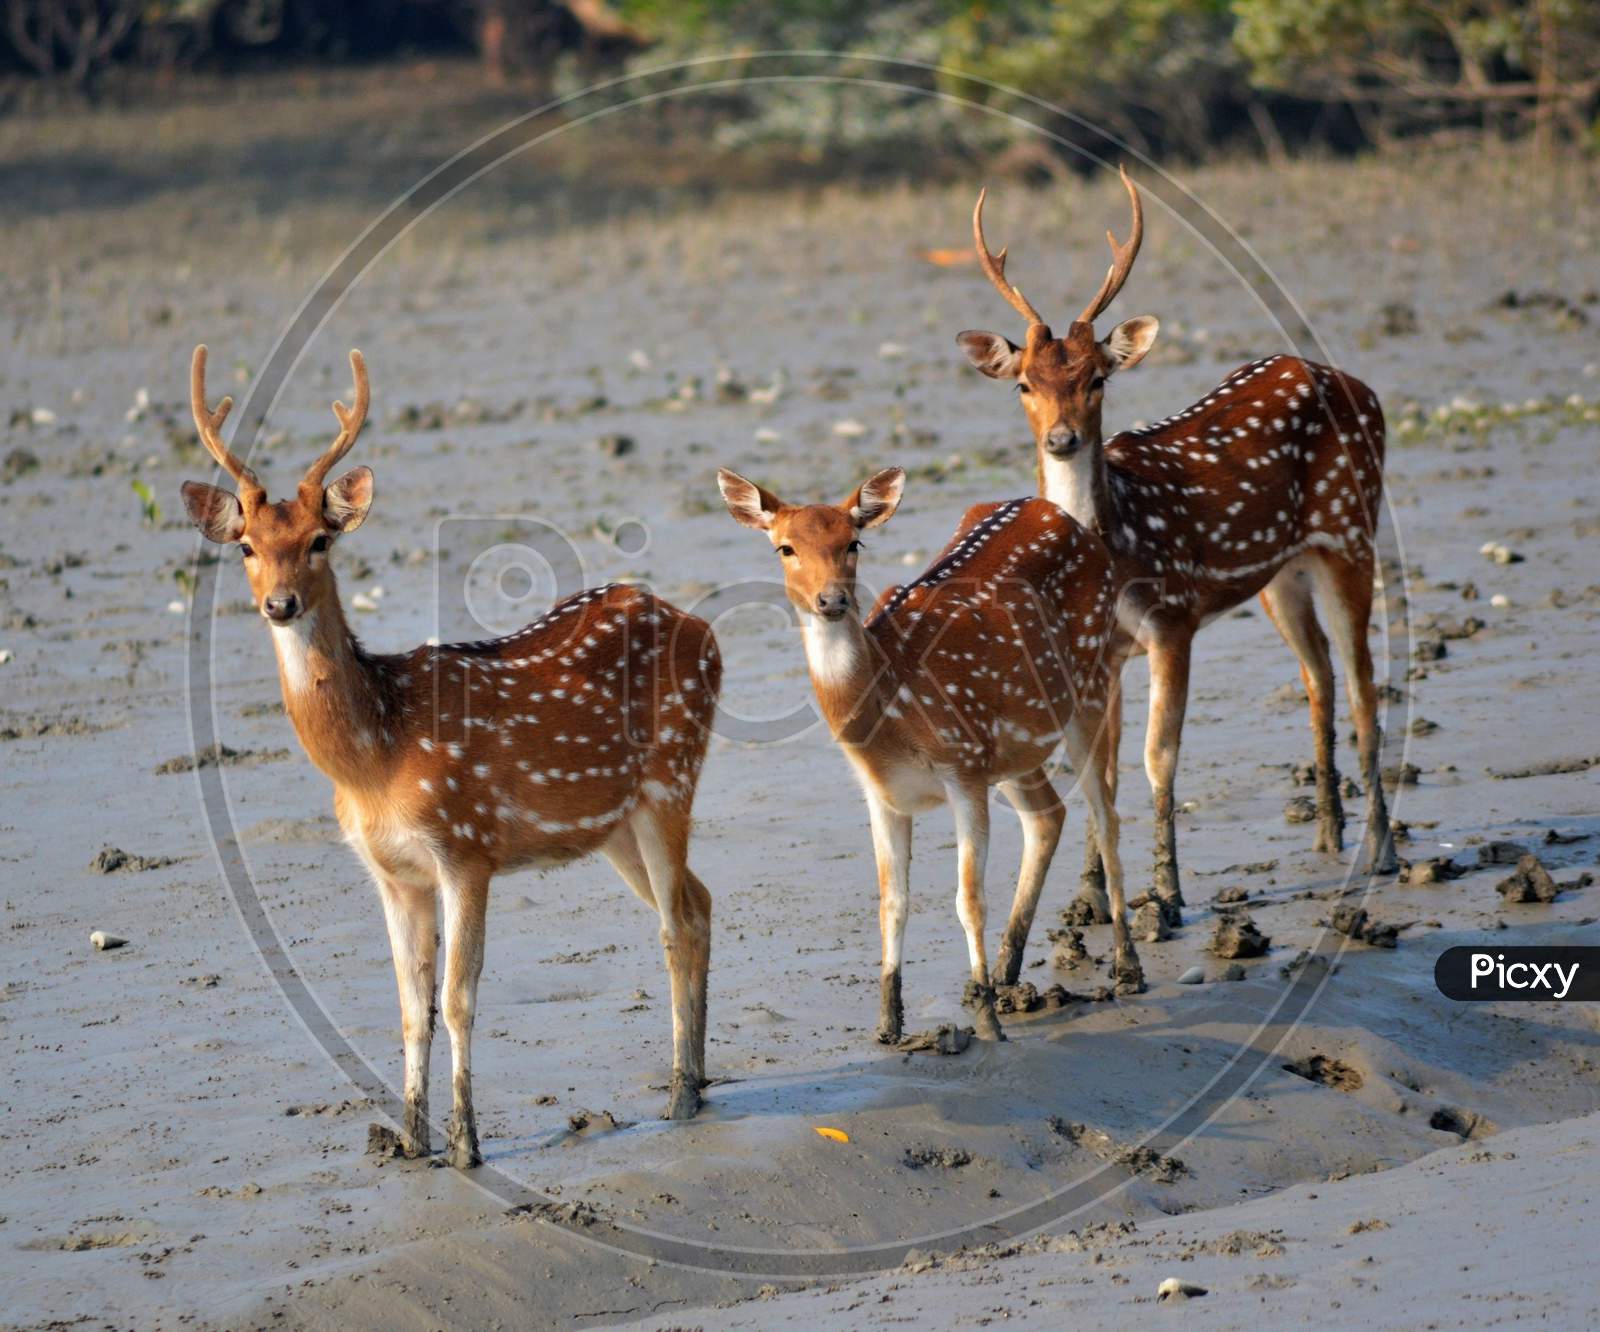 Three Spotted Deers At Sundarban Tiger Reserve Standing On The Mud Bank Of River.